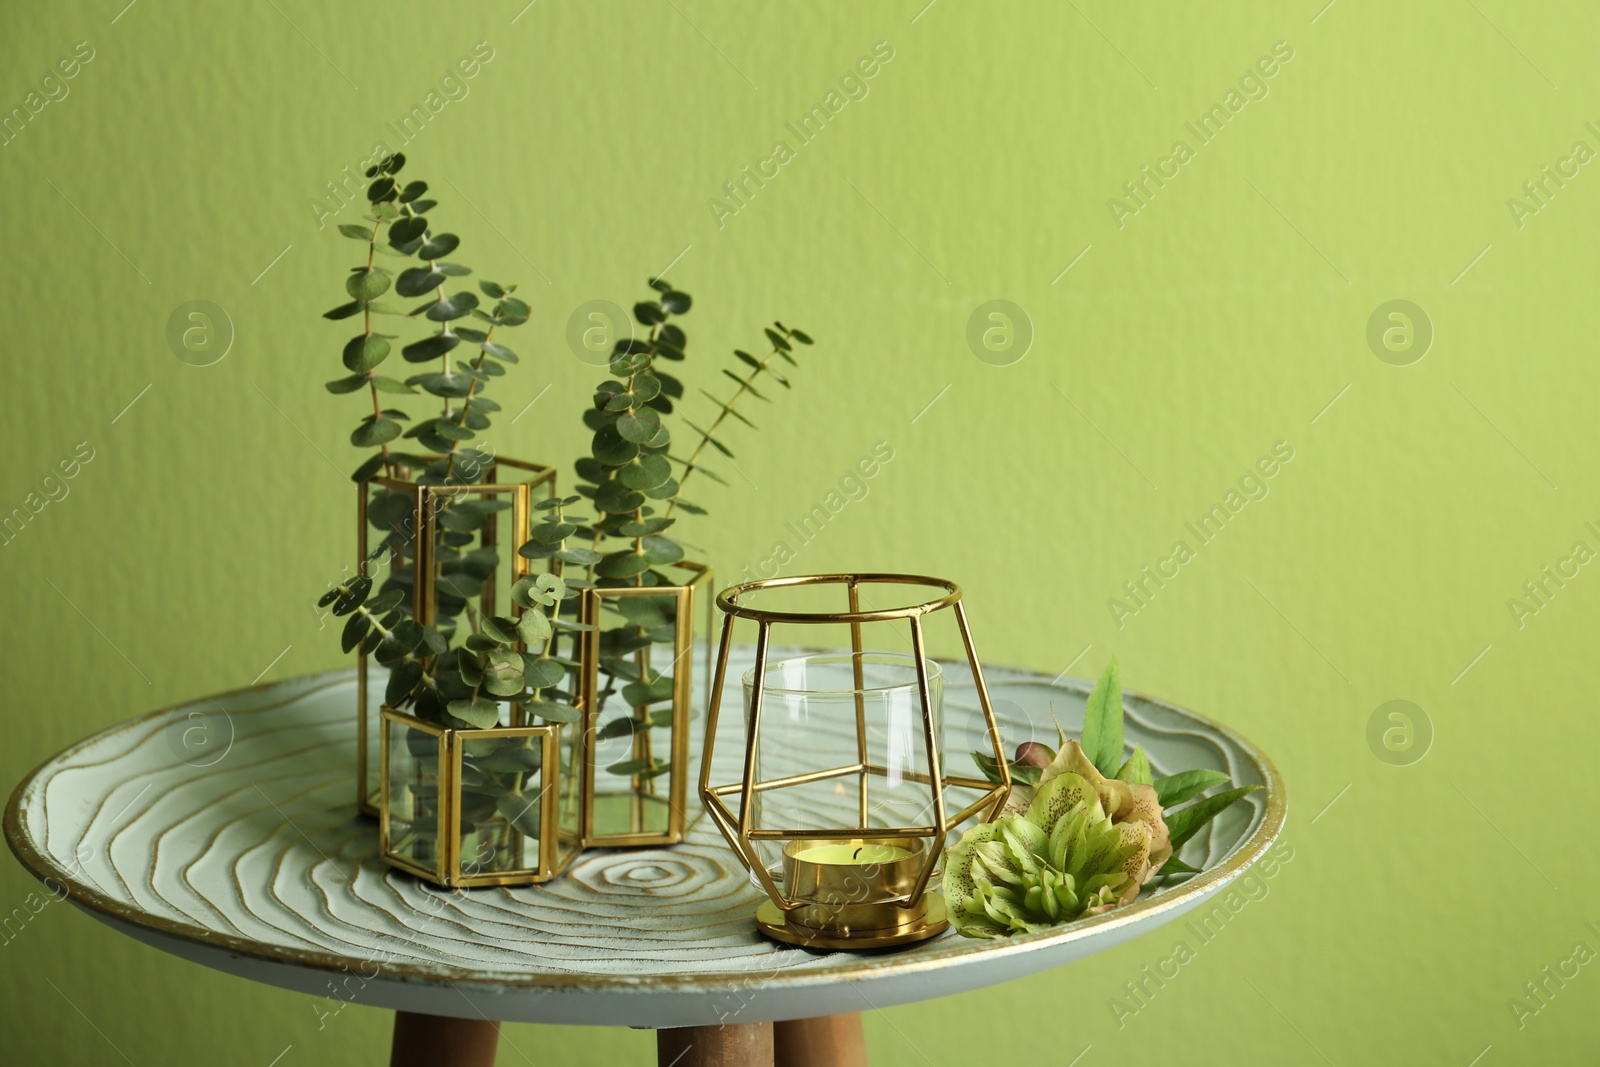 Photo of Stylish composition with burning candle and plants on stand against green background. Cozy interior element